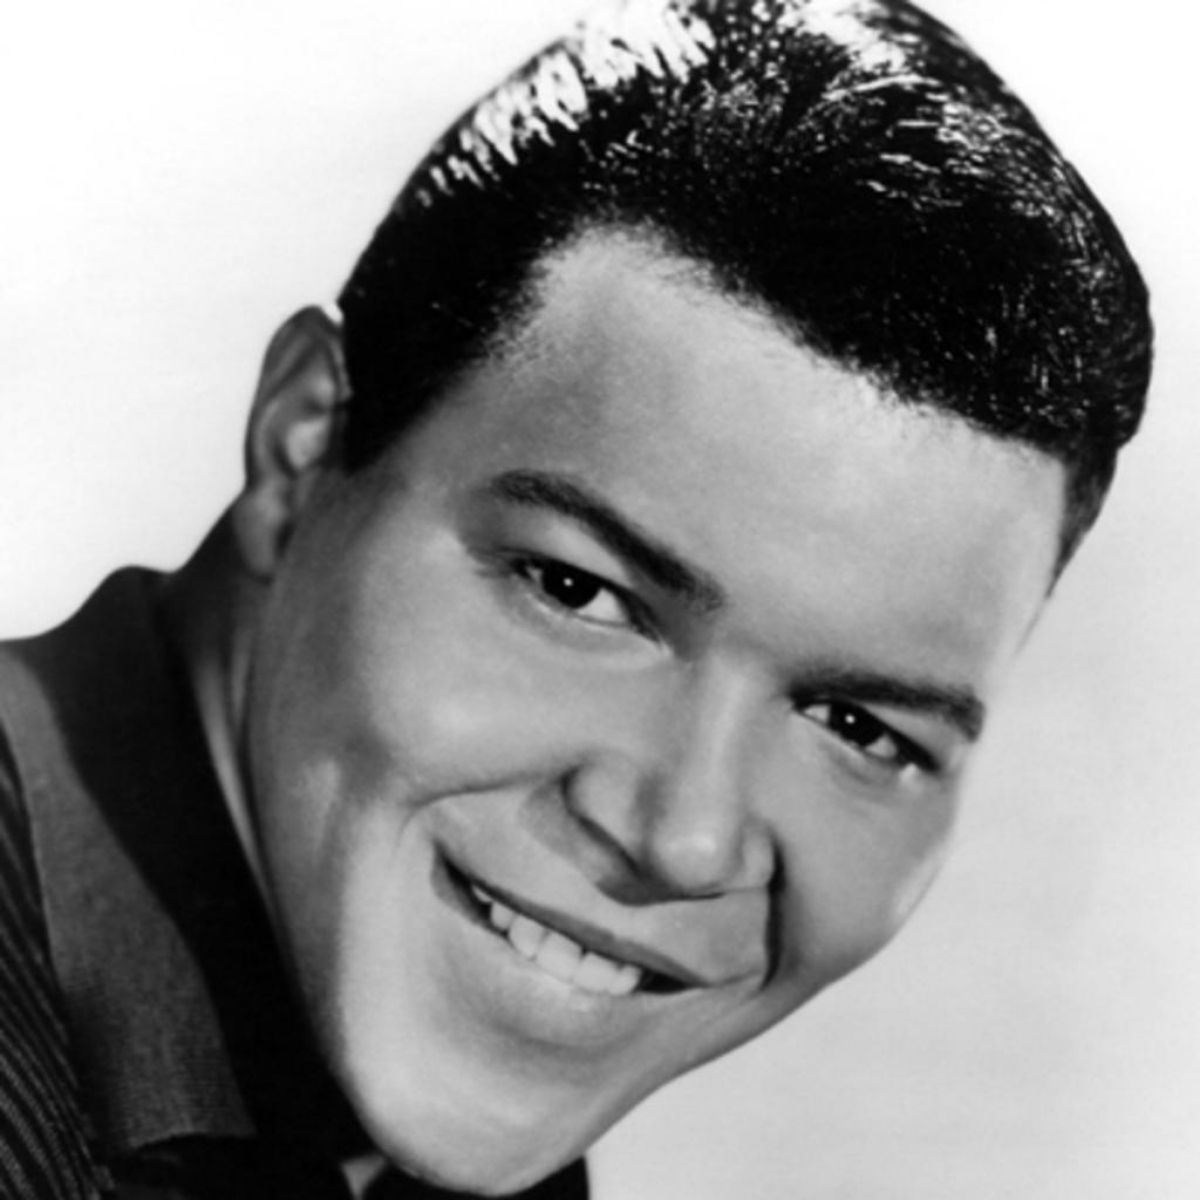 Chubby Checker (Chubby Checker) in his youth